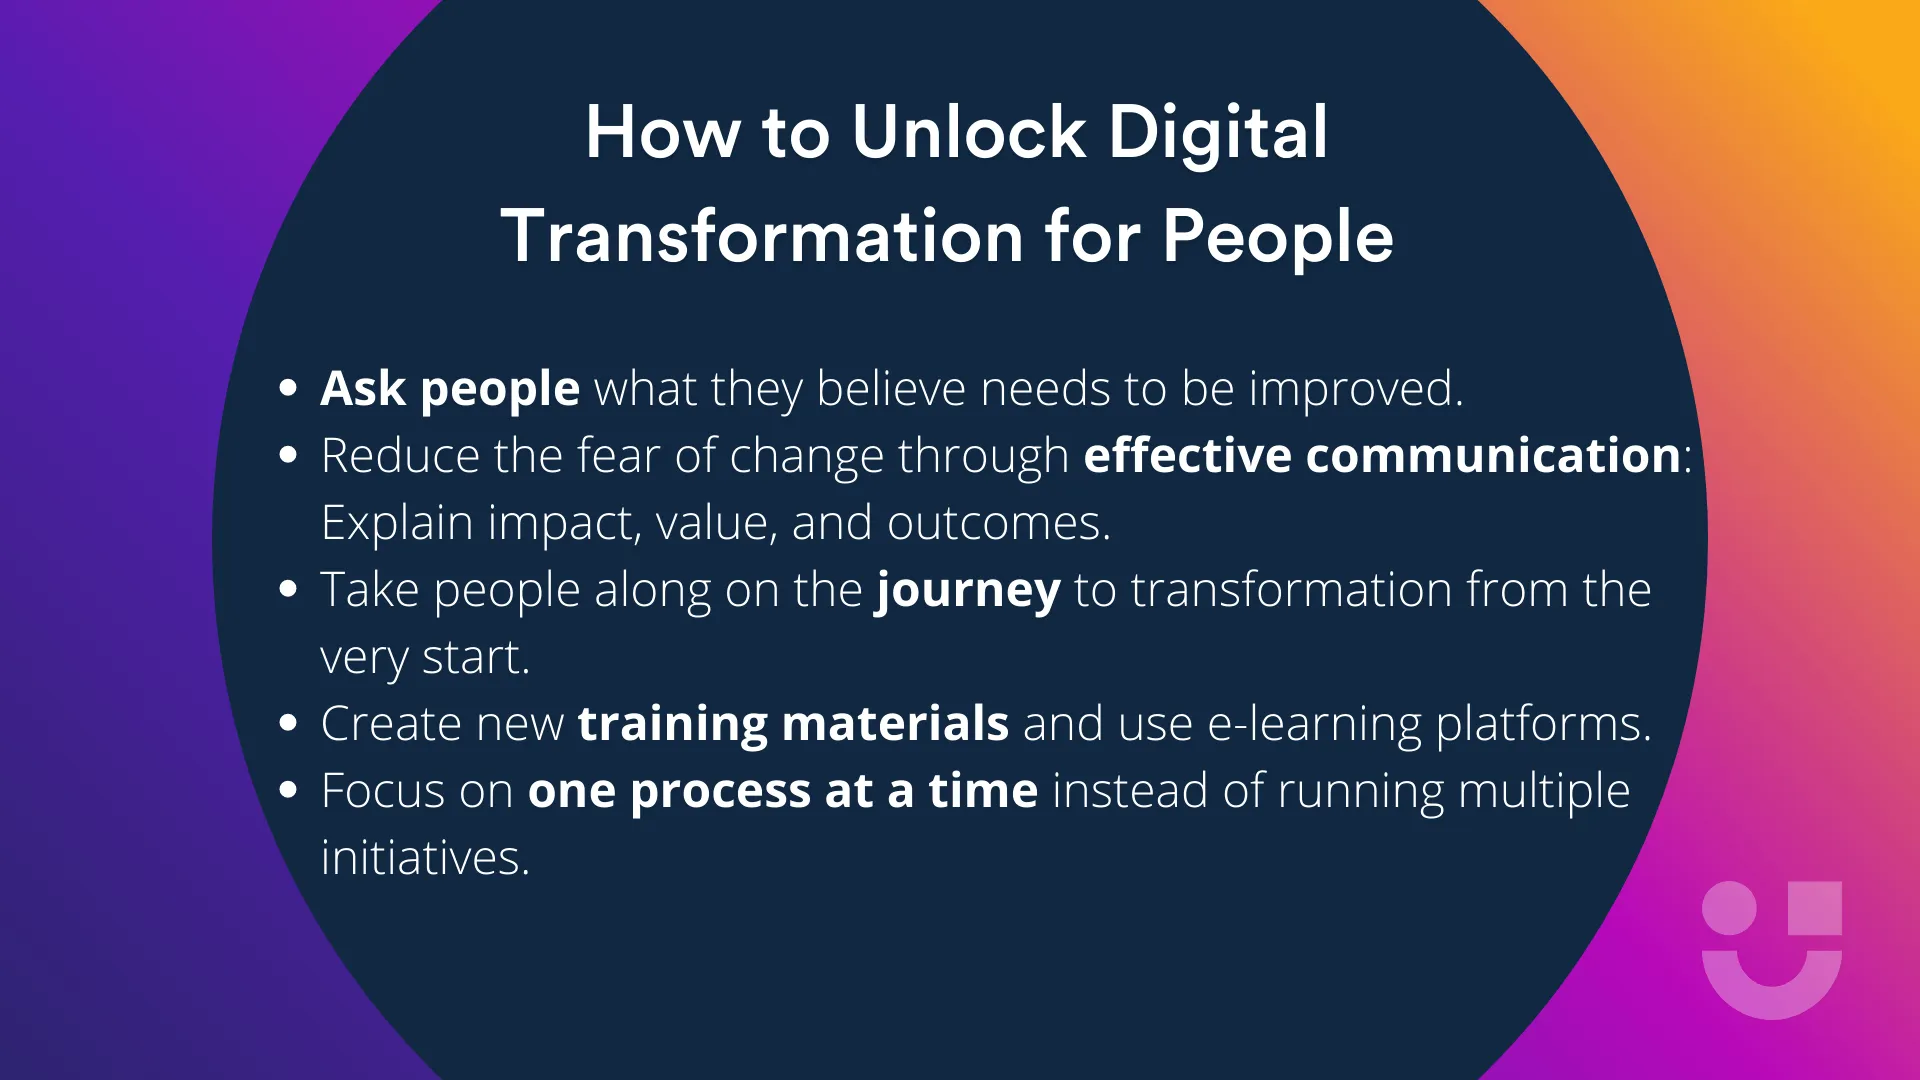 key takeaways on how to unlock digital transformation for people written in white on a navy blue background